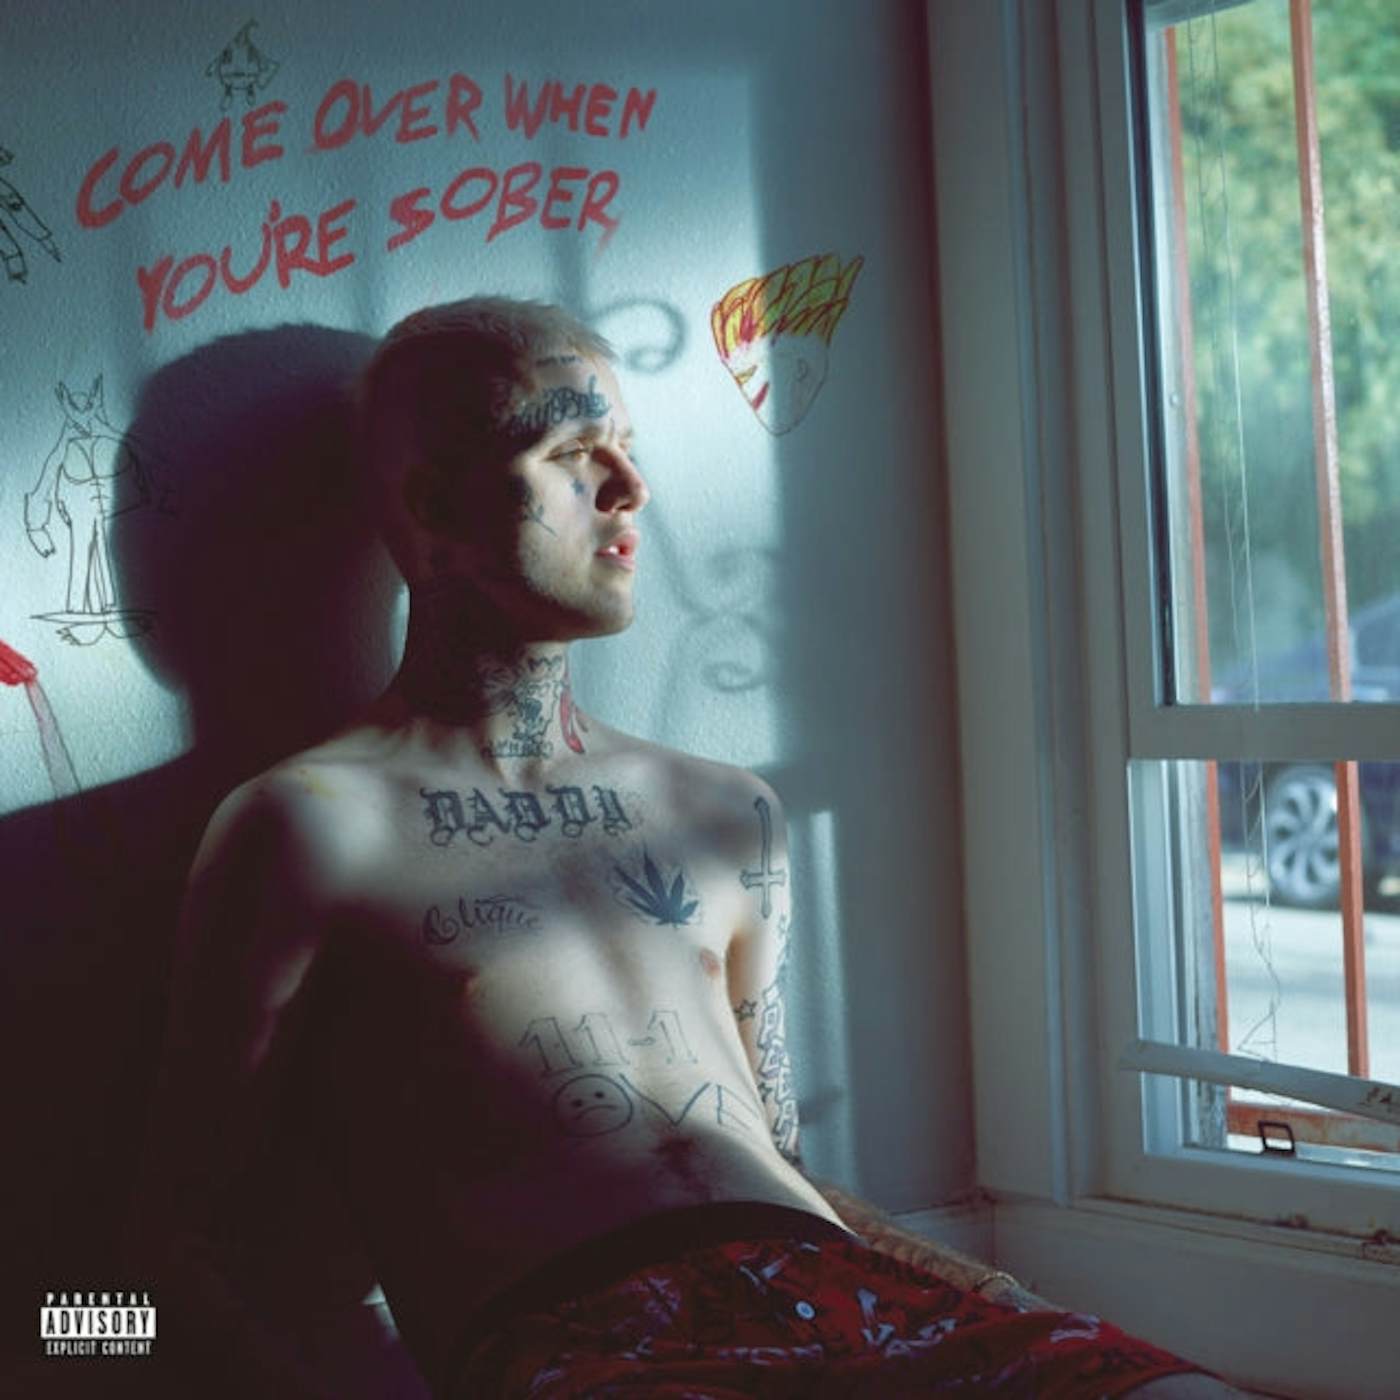 Lil Peep LP Vinyl Record - Come Over When You're Sober - Pt 1 & 2